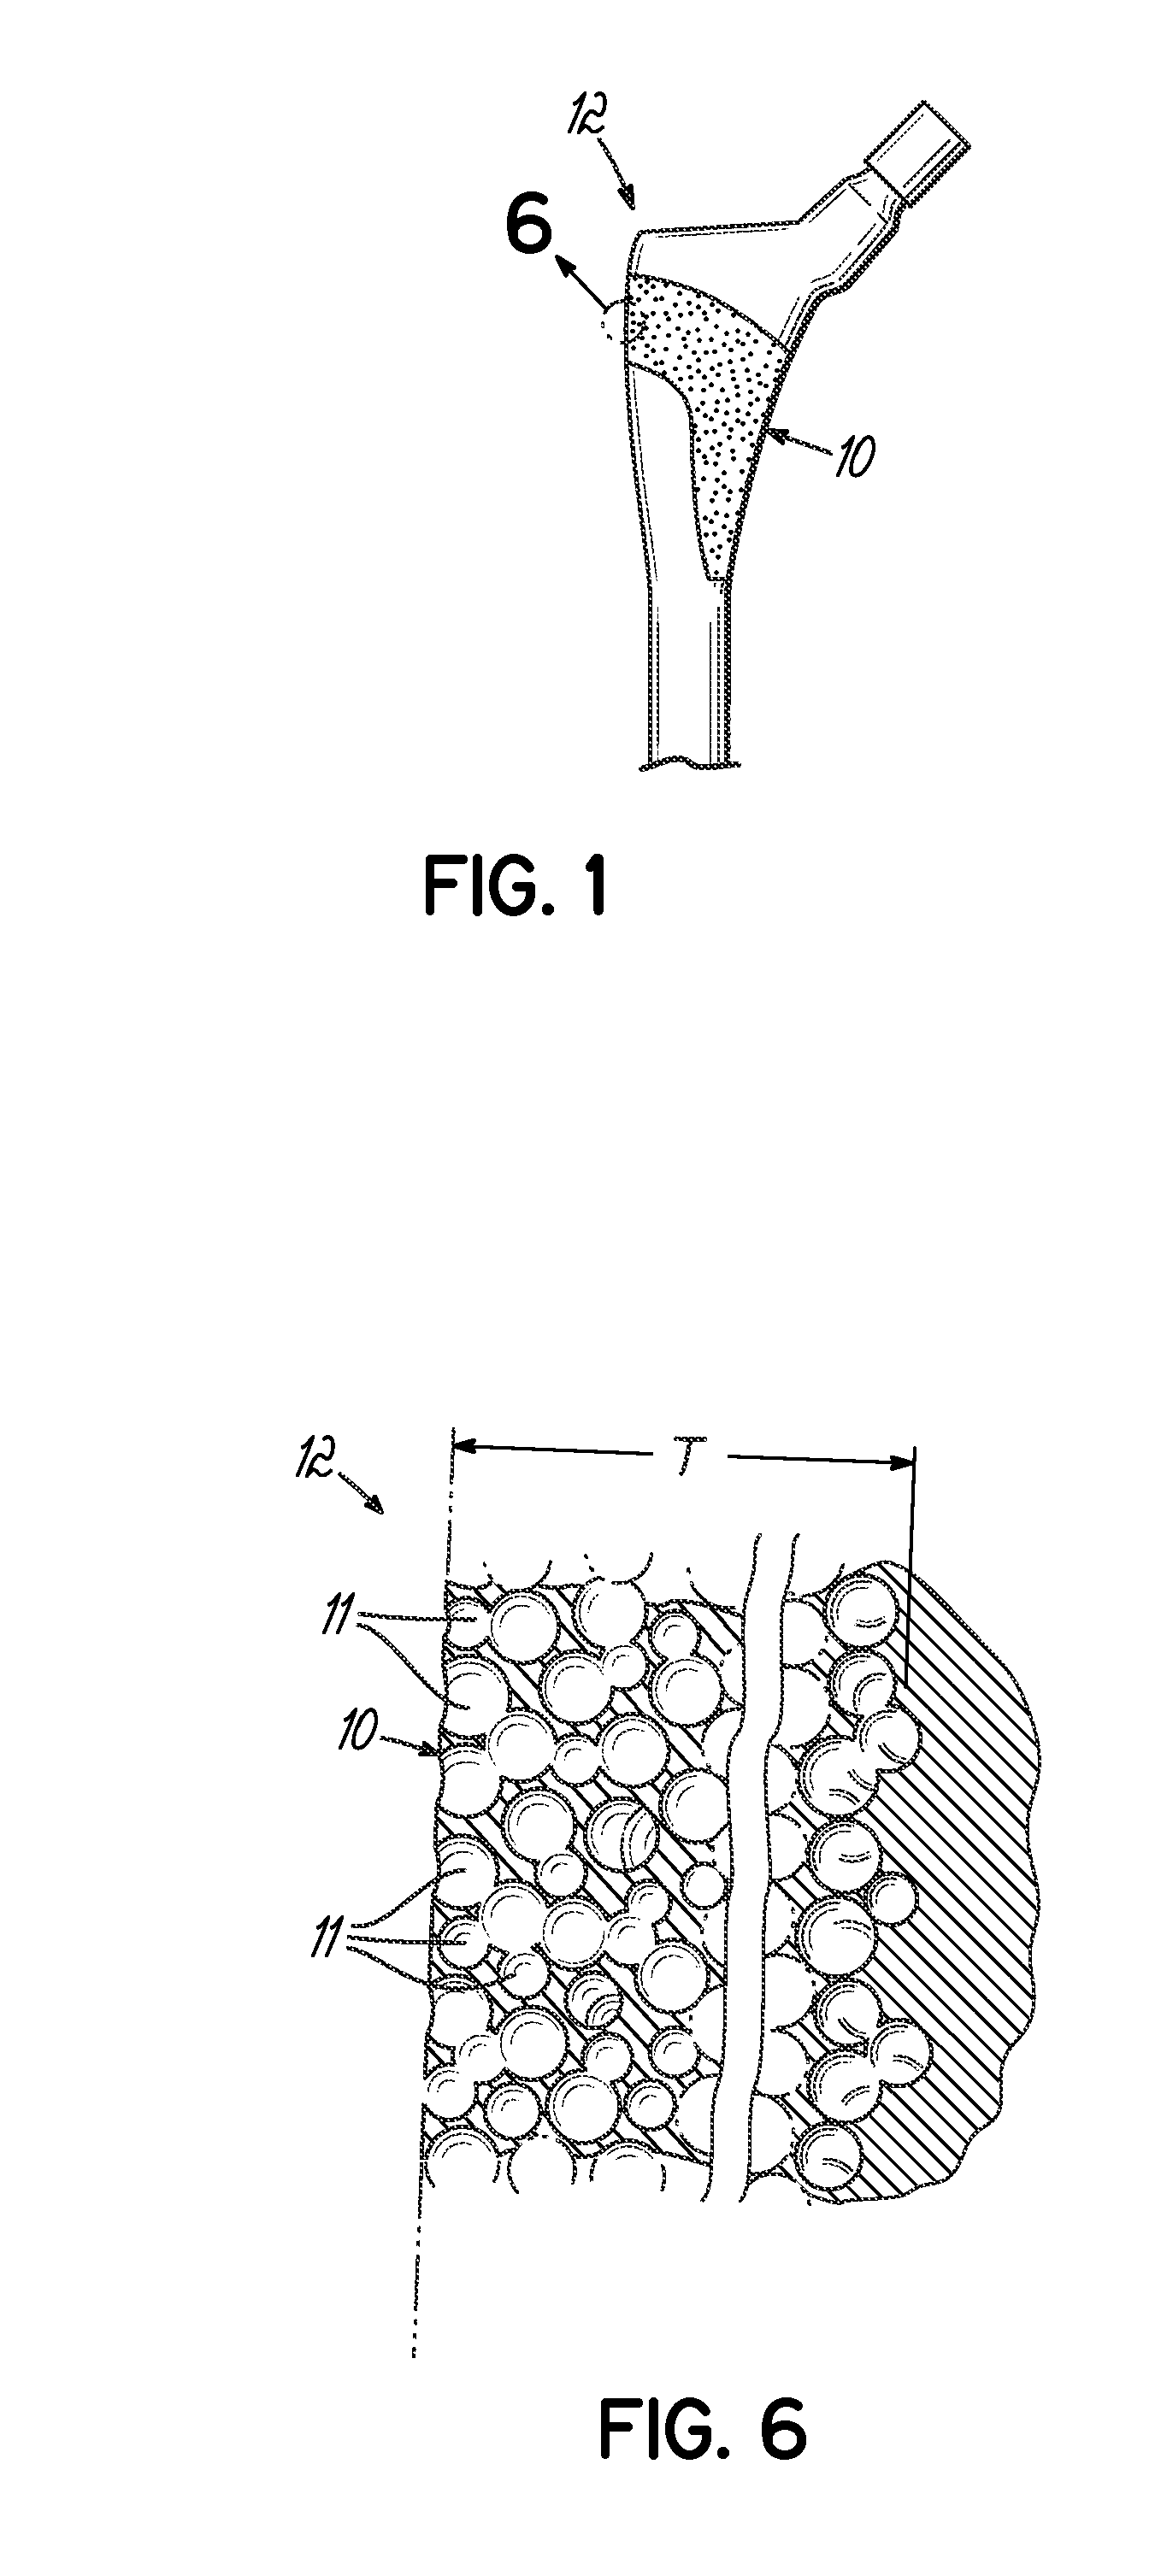 Method for forming an integral porous region in a cast implant